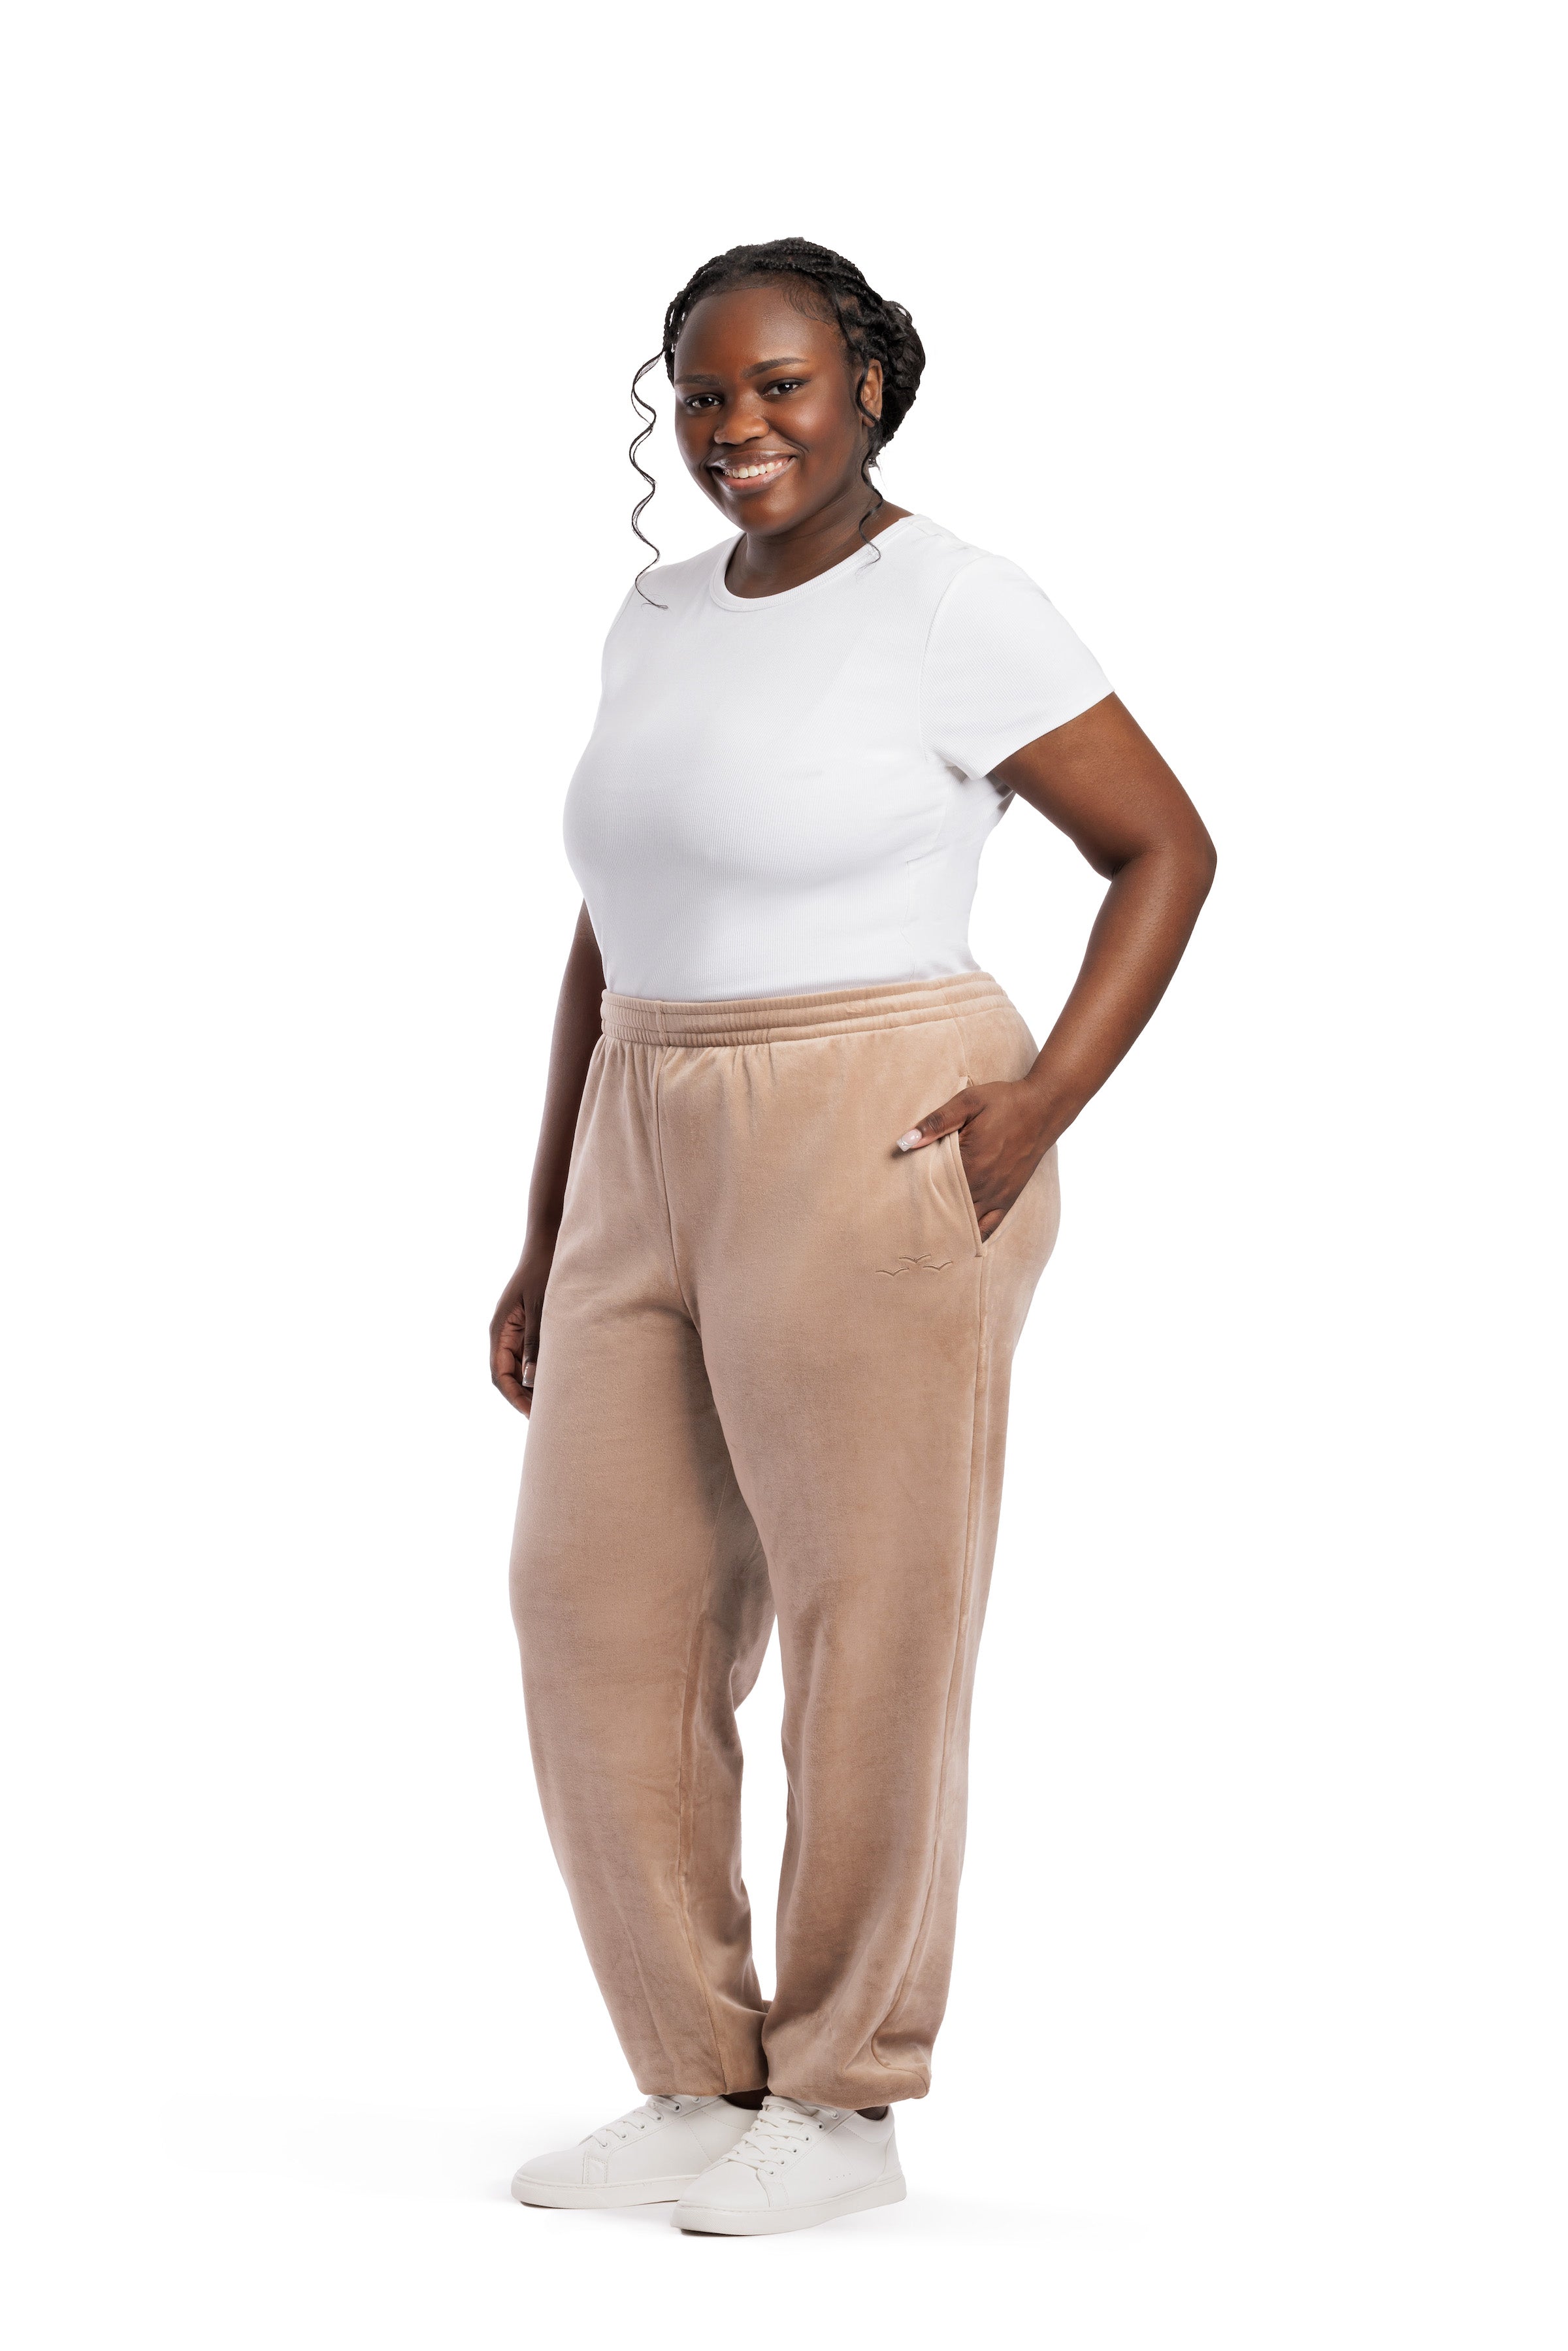 Women's Nova velour relaxed joggers in warm taupe